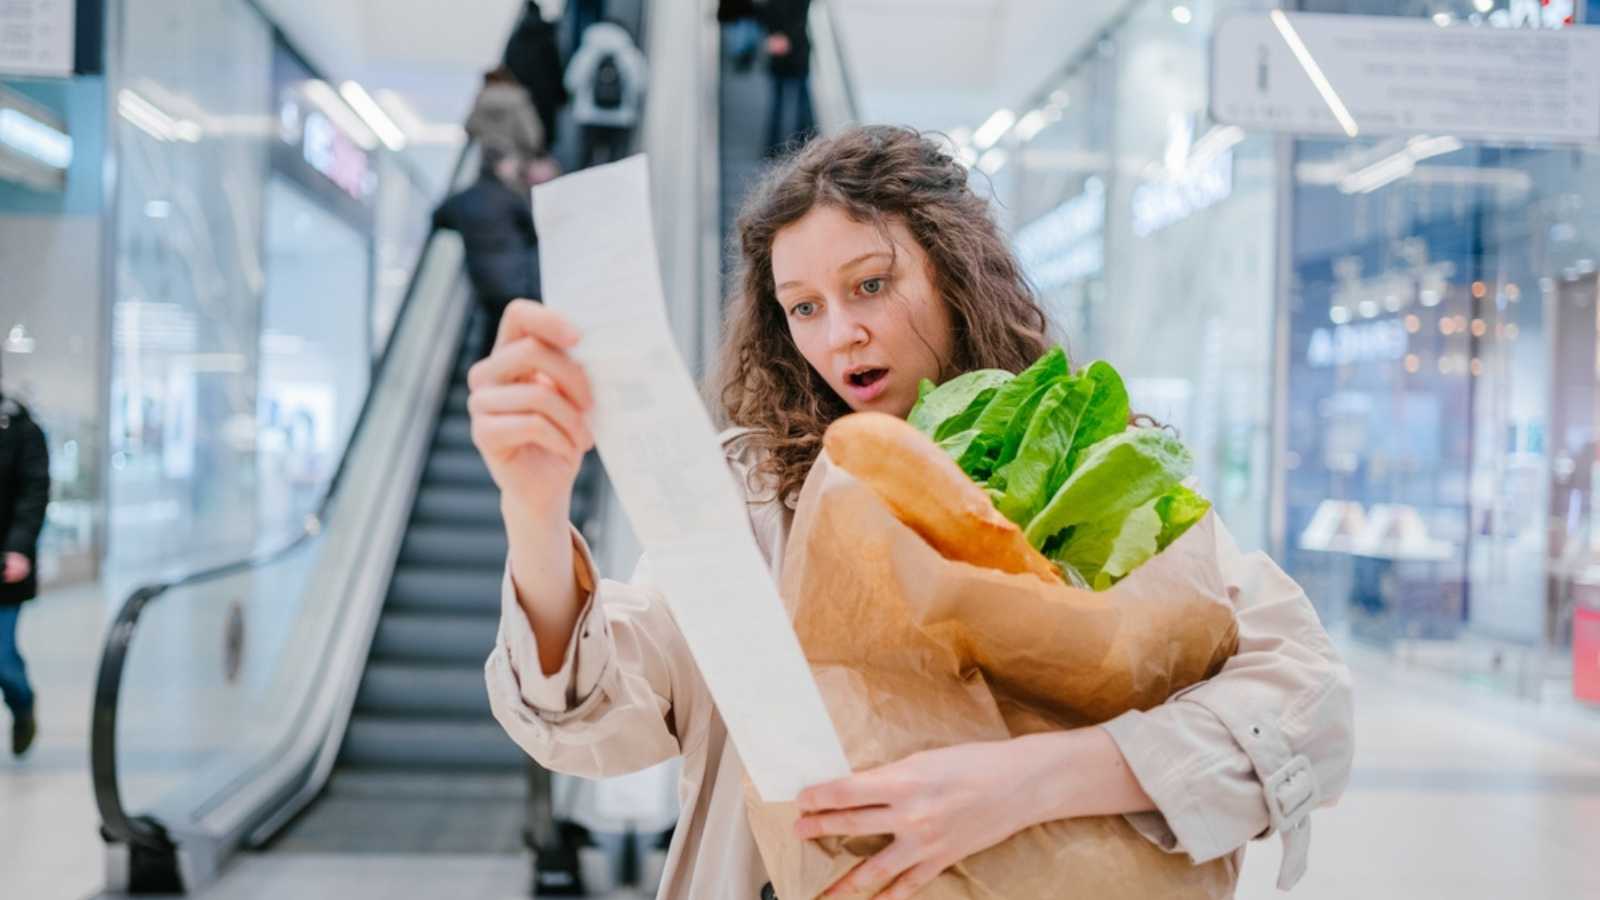 Woman shocked on seeing grocery bill